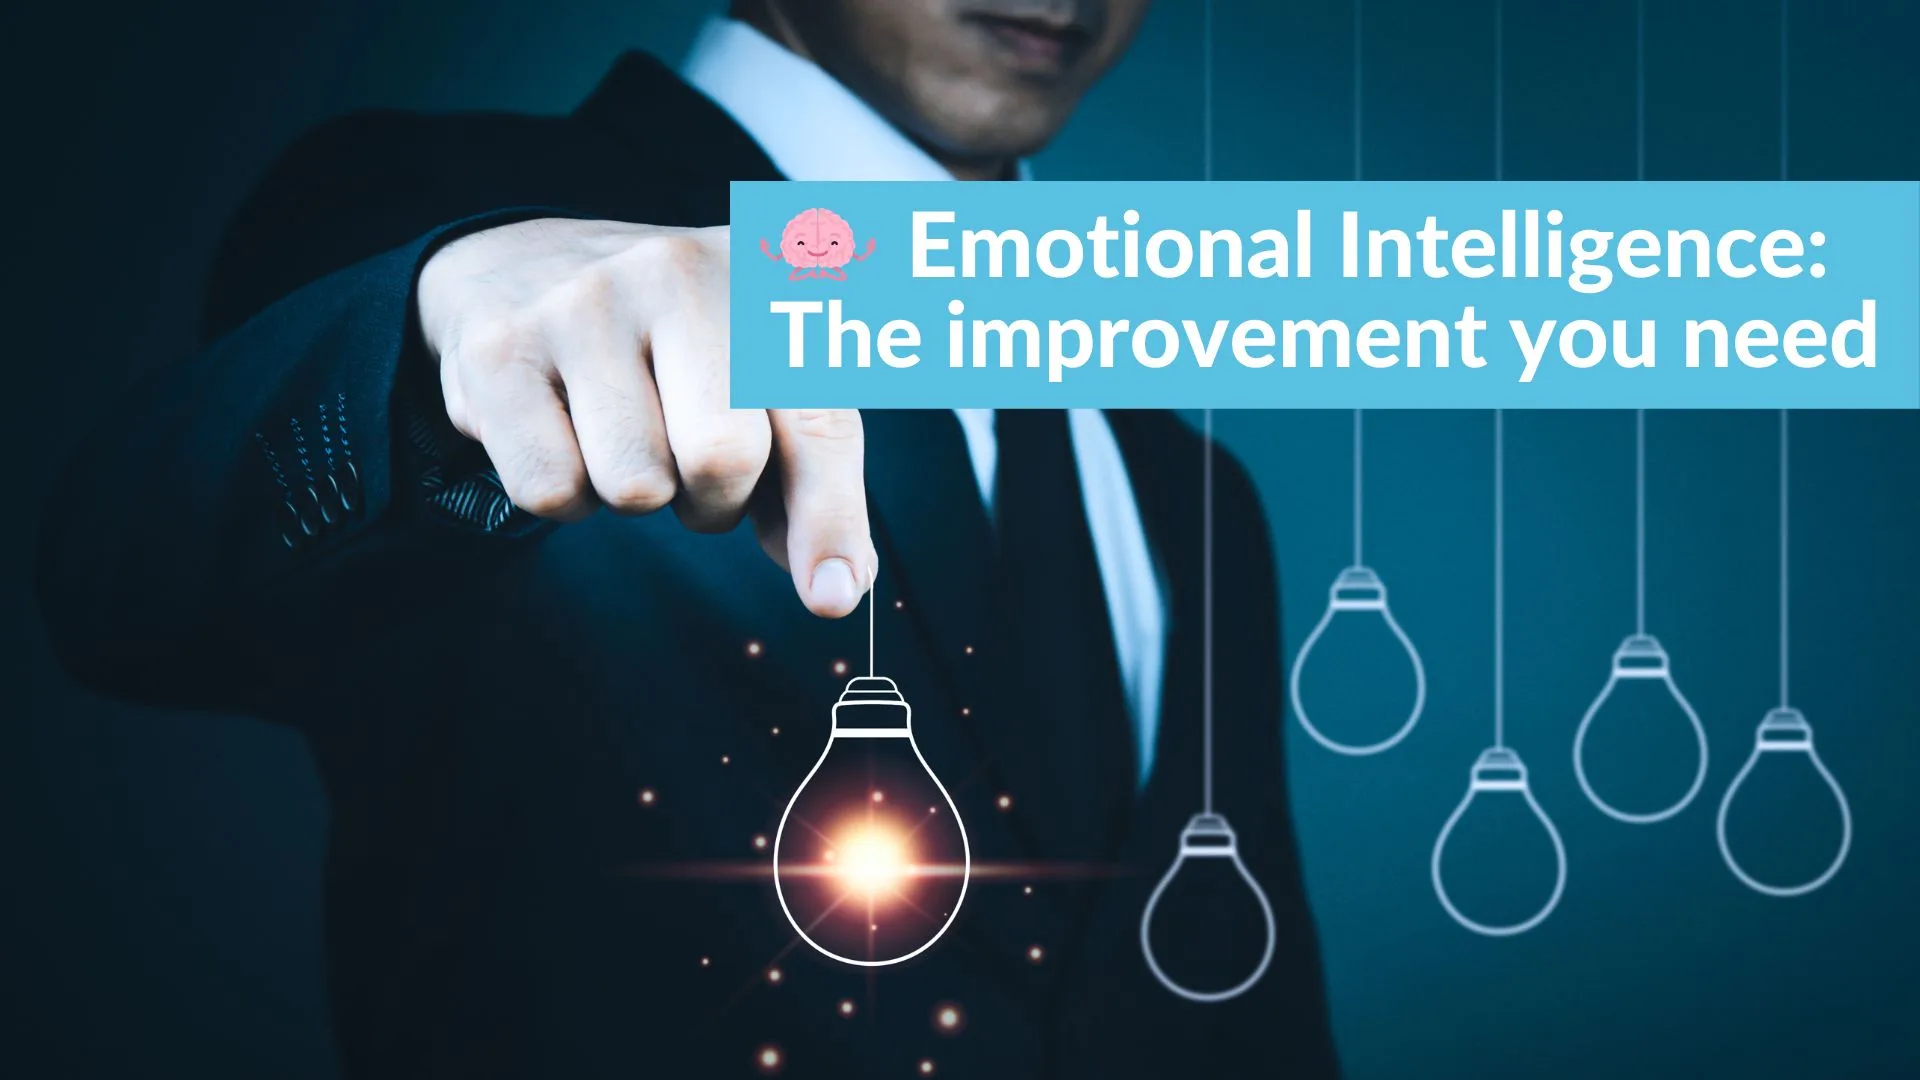 Want to improve your public speaking? Improve your Emotional Intelligence